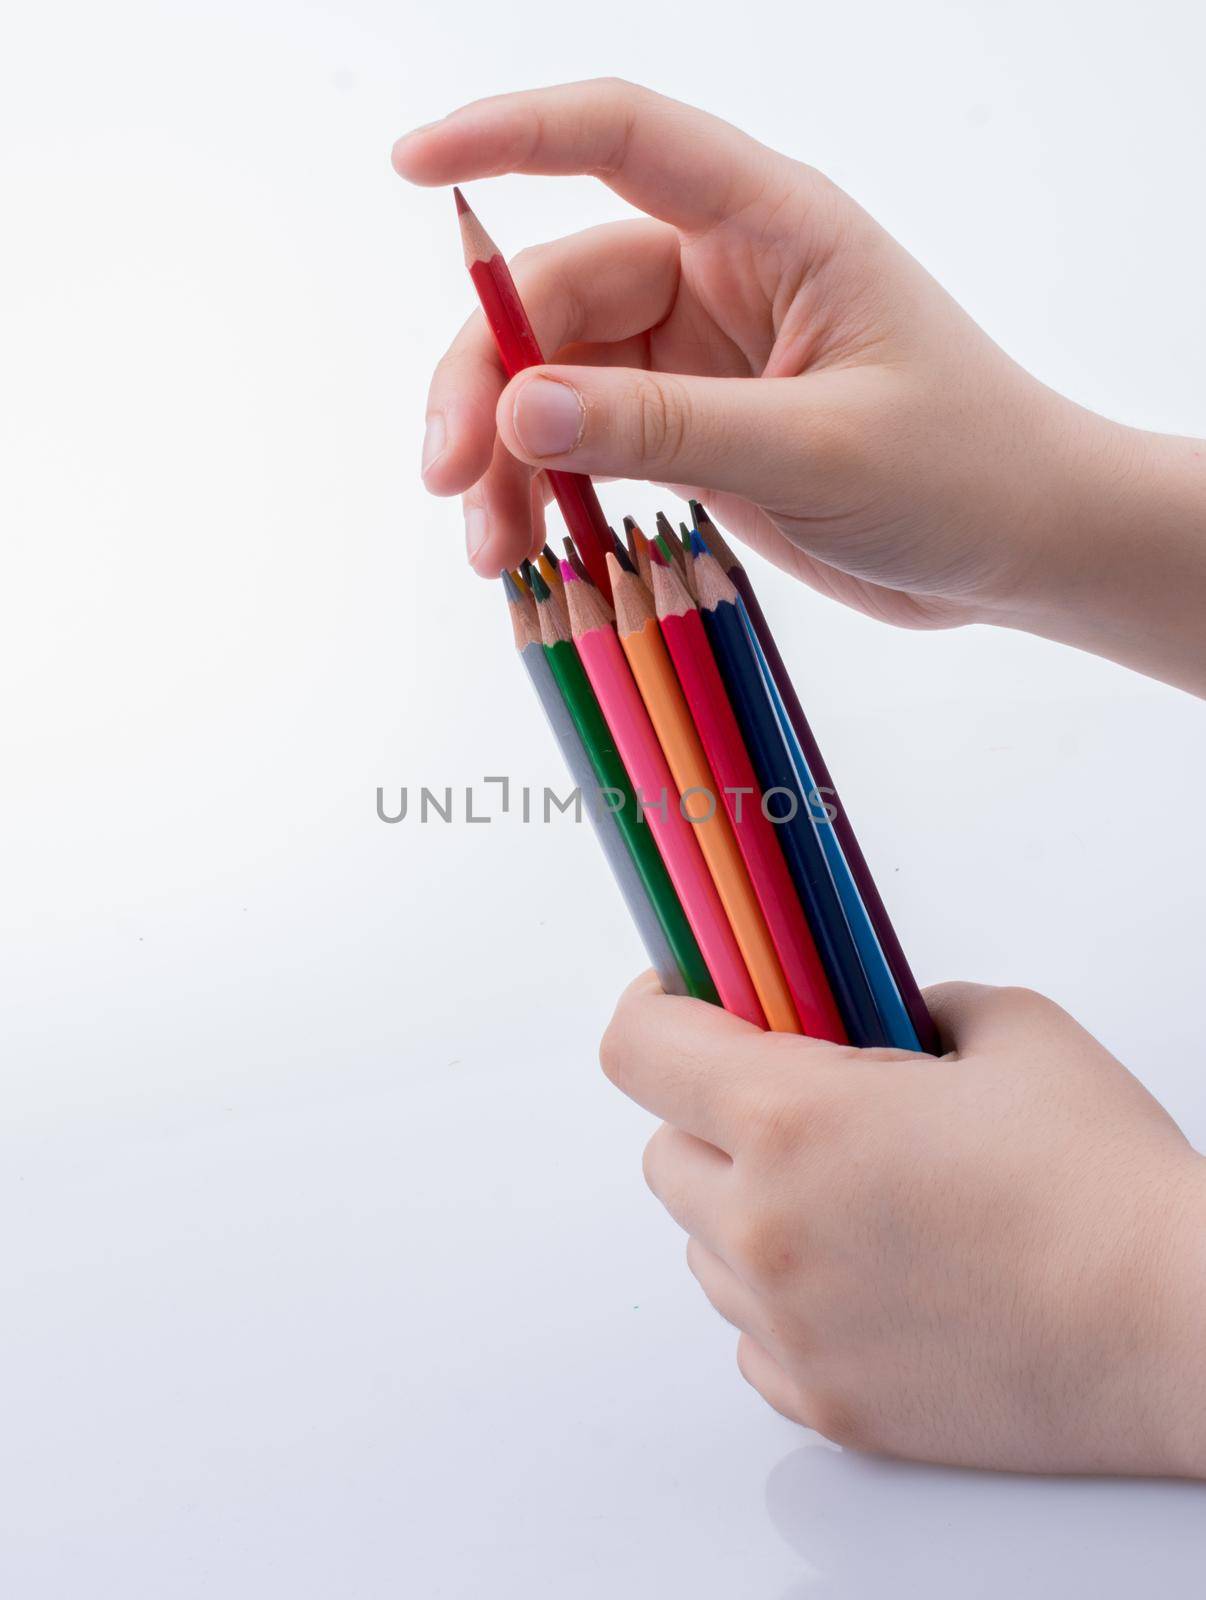  Color Pencils on a white background by berkay